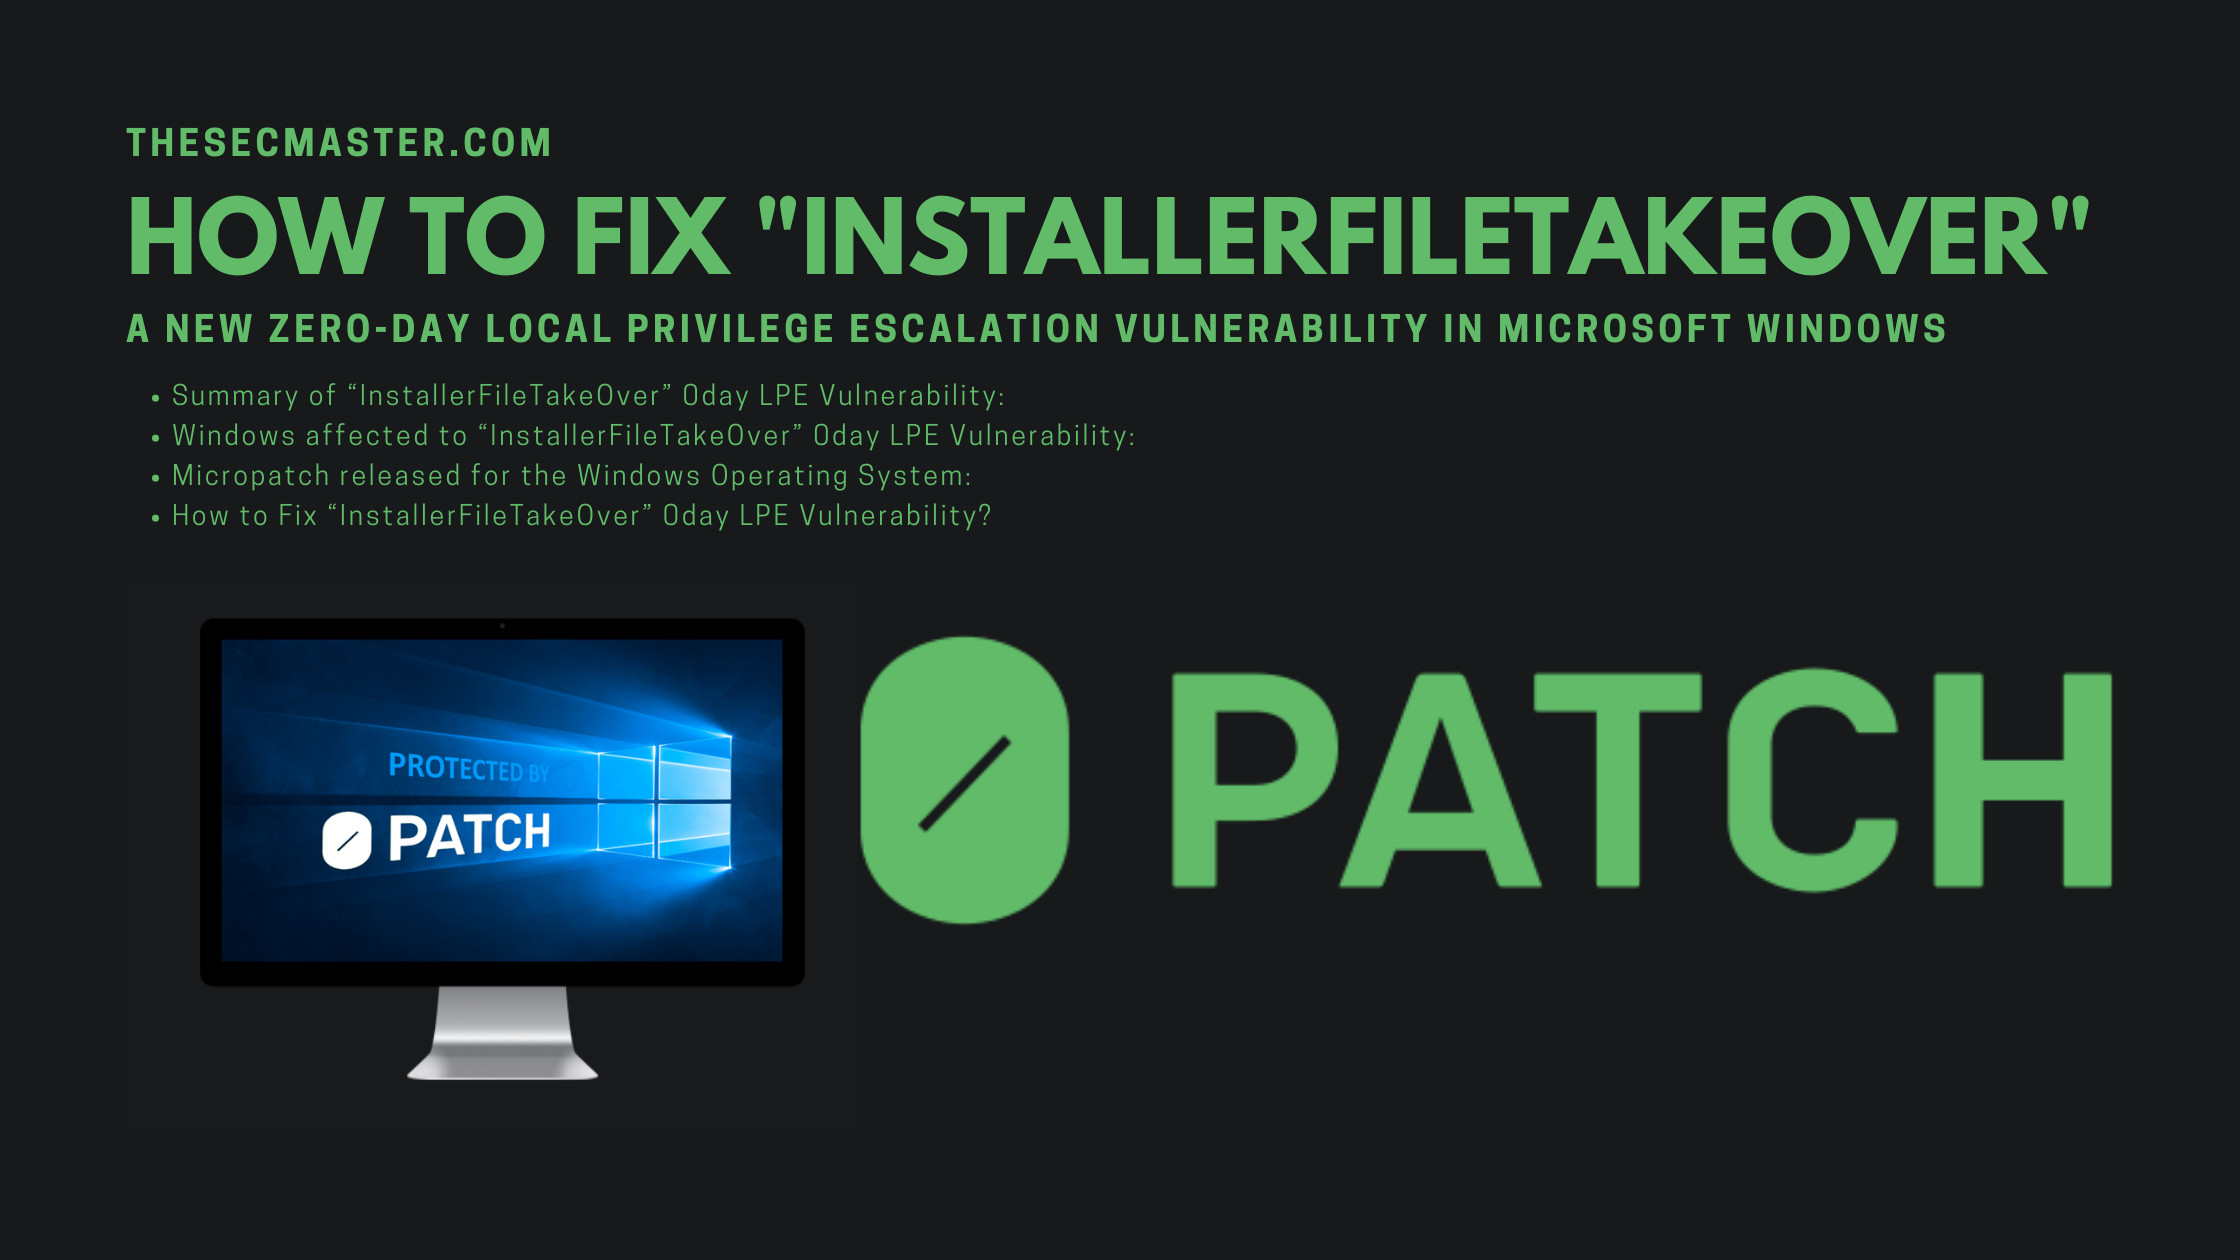 How To Fix Installerfiletakeover 0day Lpe Vulnerability In Windows